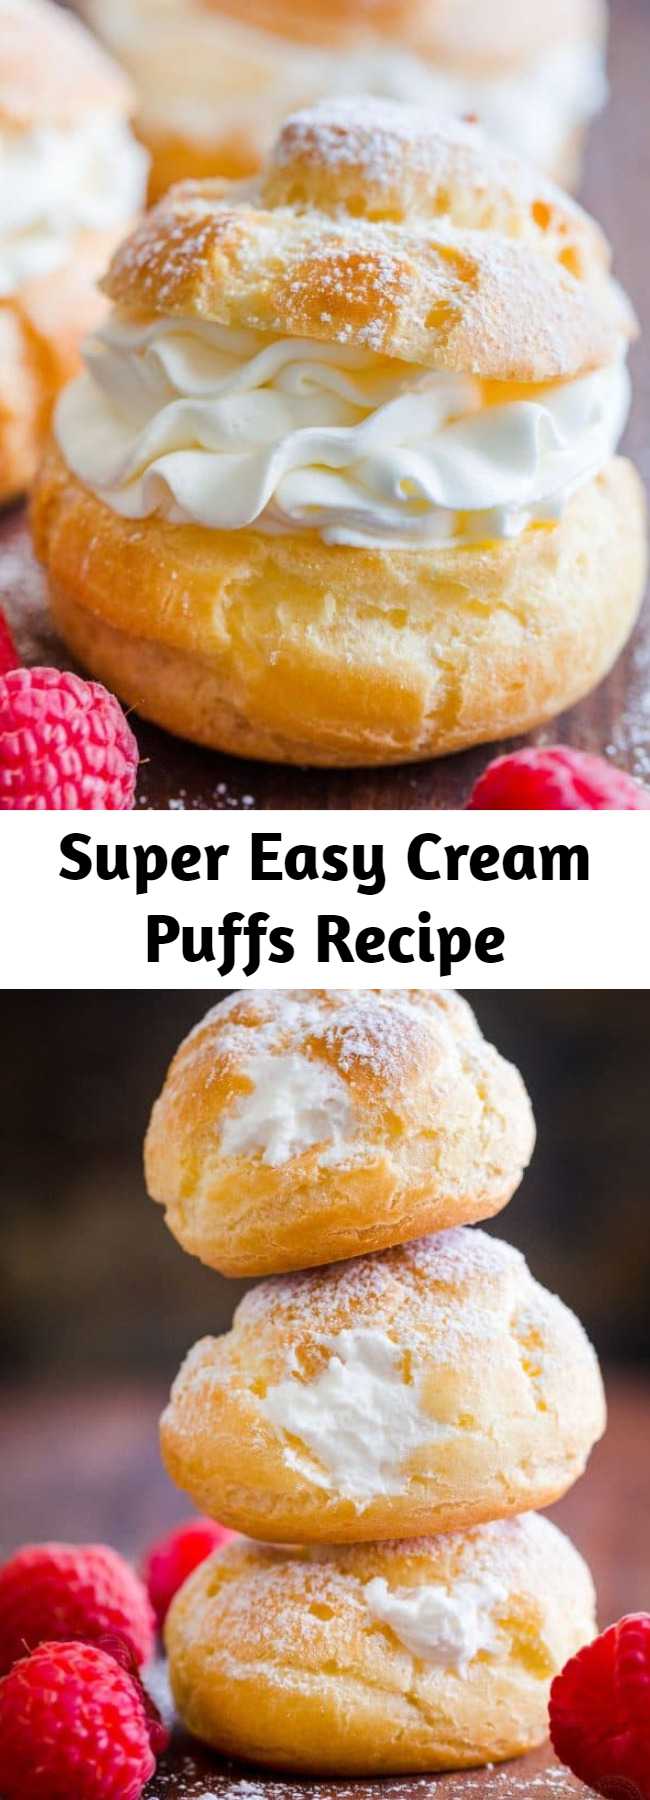 Super Easy Cream Puffs Recipe - Homemade Cream Puffs filled with sweet cream and raspberries. Learn how to make a bakery quality, buttery Choux pastry dough. #creampuffs #creampuffrecipe #chouxpastry #chouxpaste #dessert #pastry #Frenchpastry #French